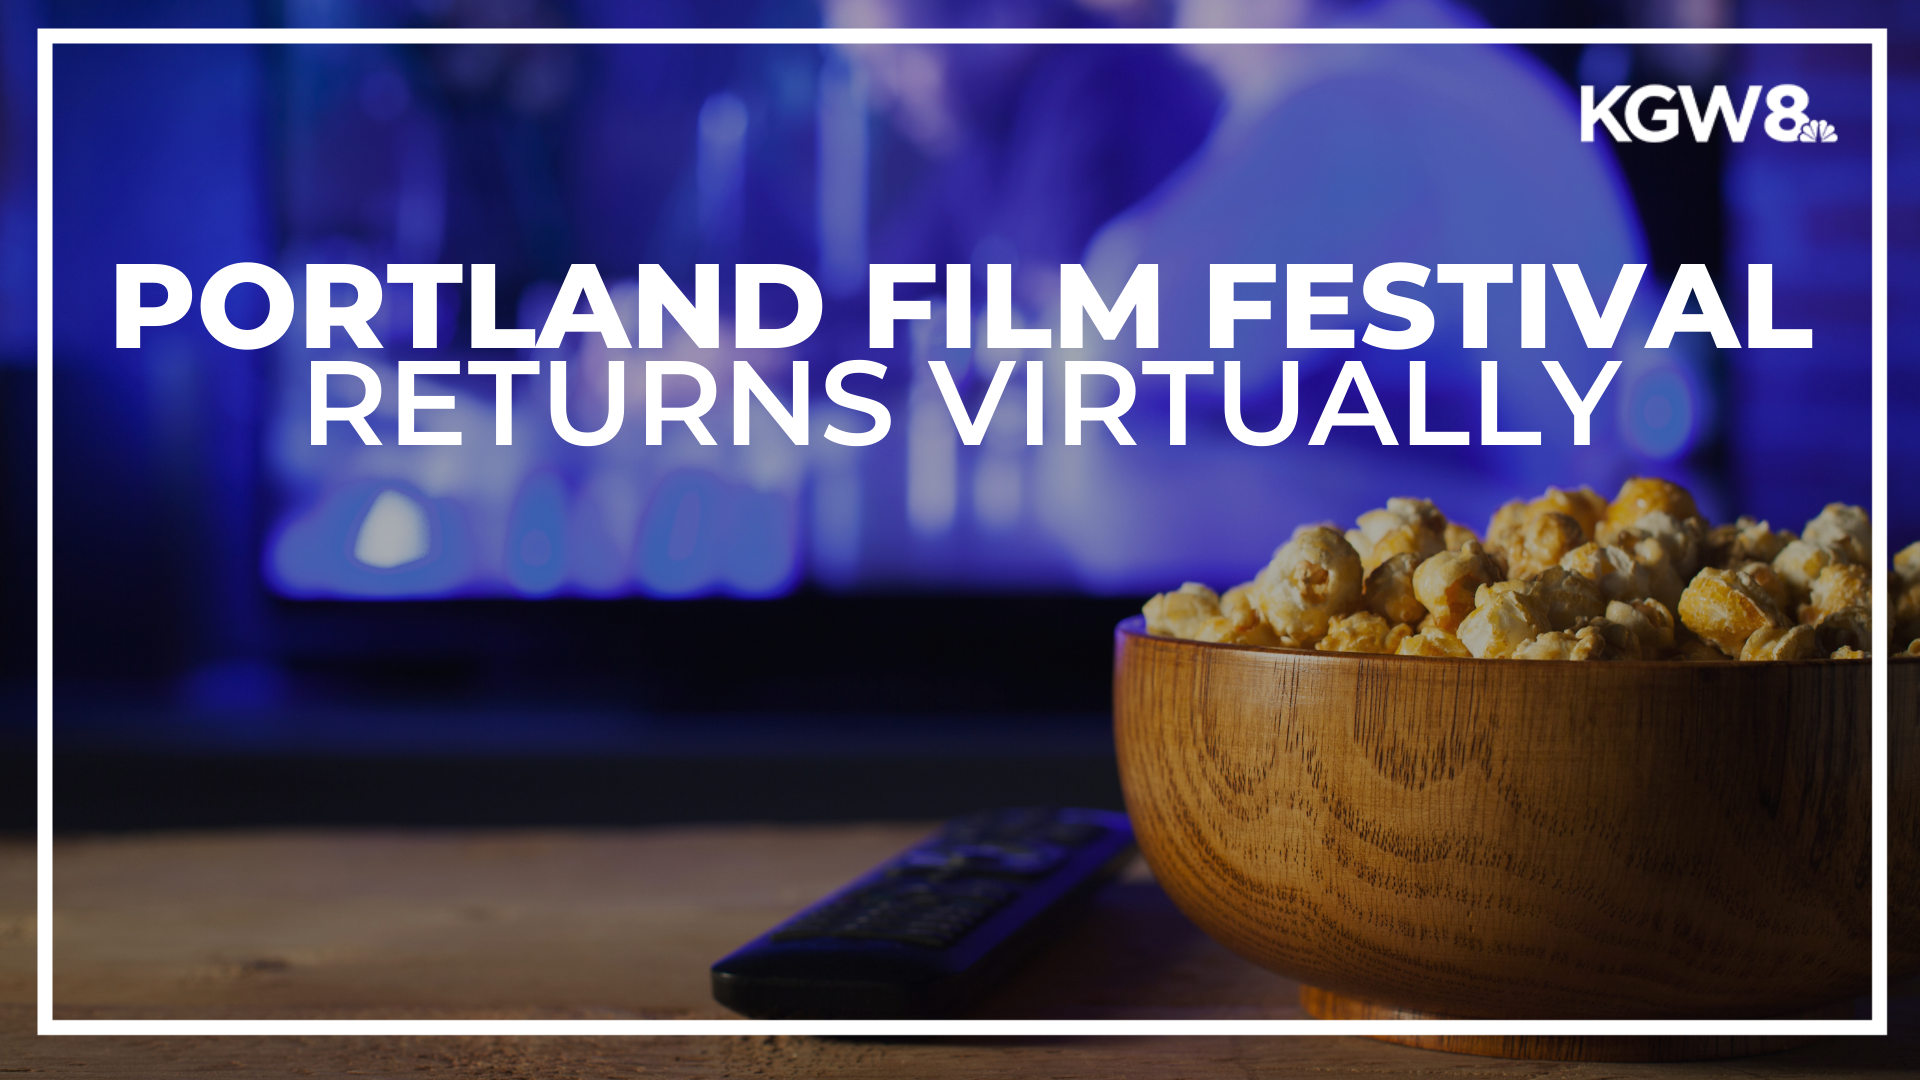 The Portland Film Festival will be virtual for the second year in a row due to the pandemic. The festival kicks off Oct. 6 and runs through Nov. 8.